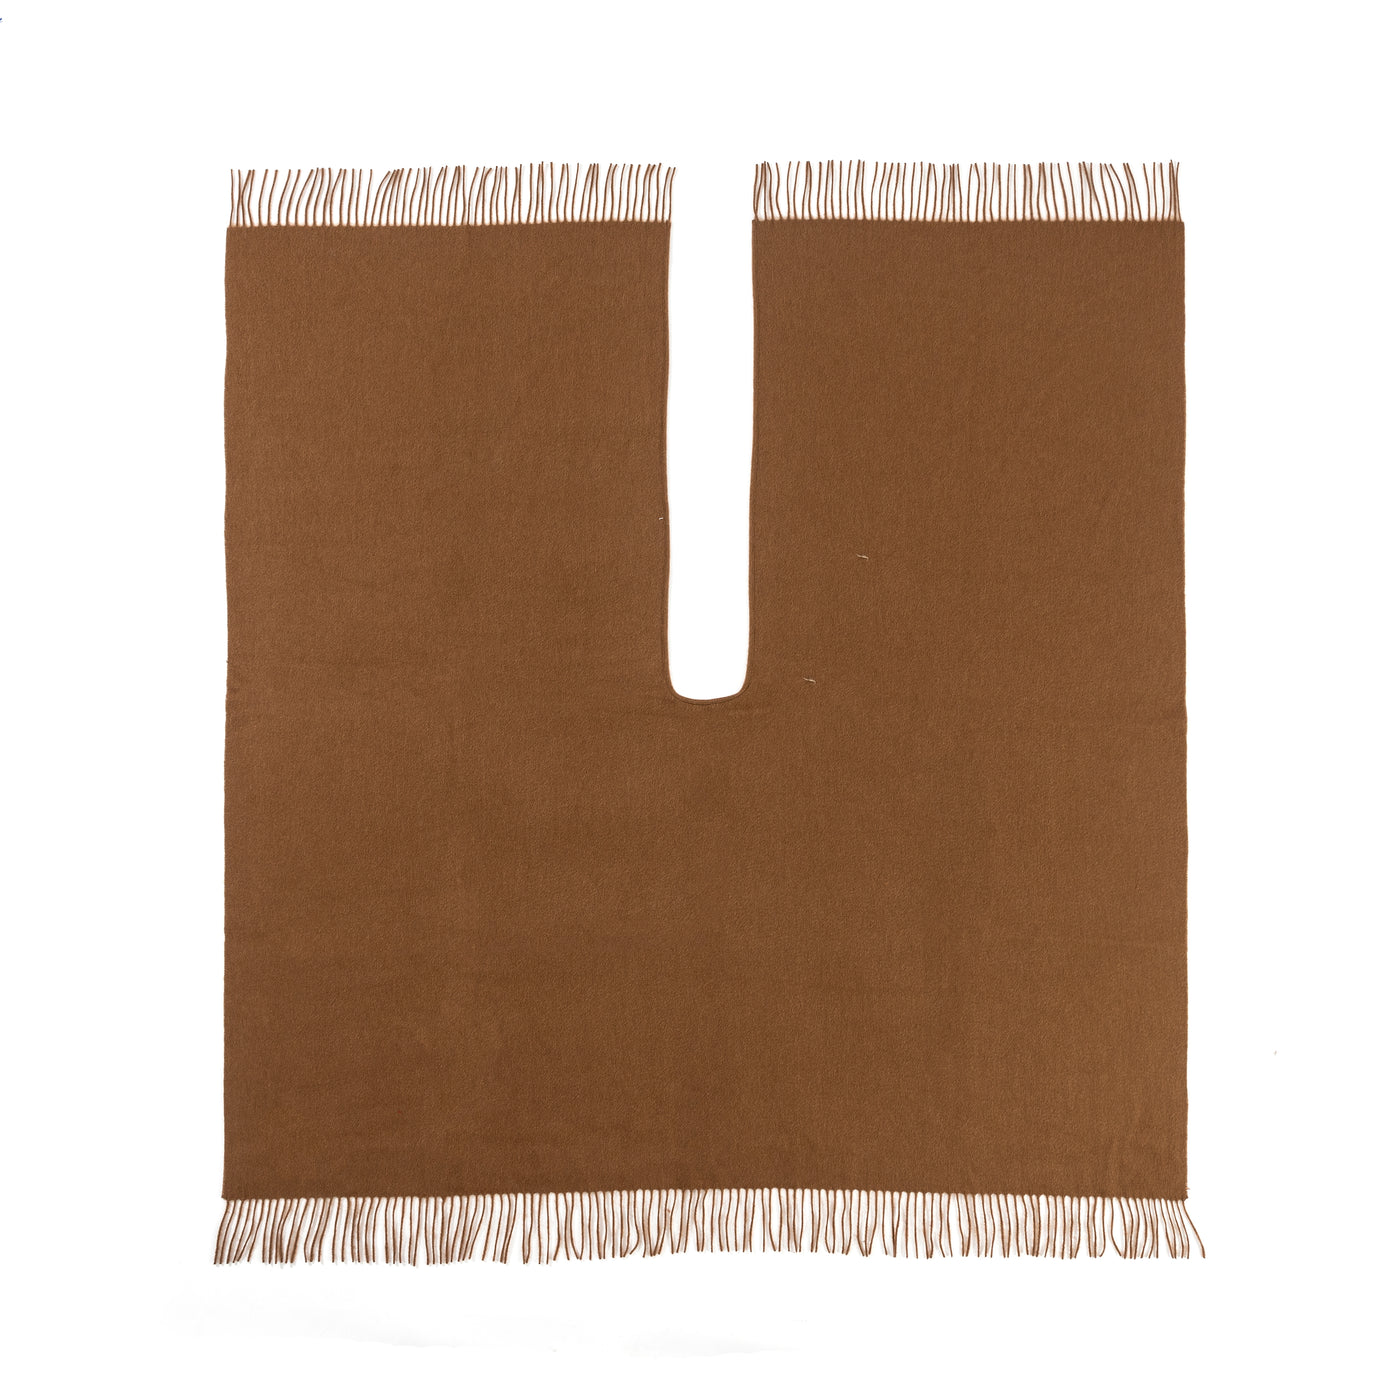 Plain Cape Brown Poncho 100% Pure Lambswool